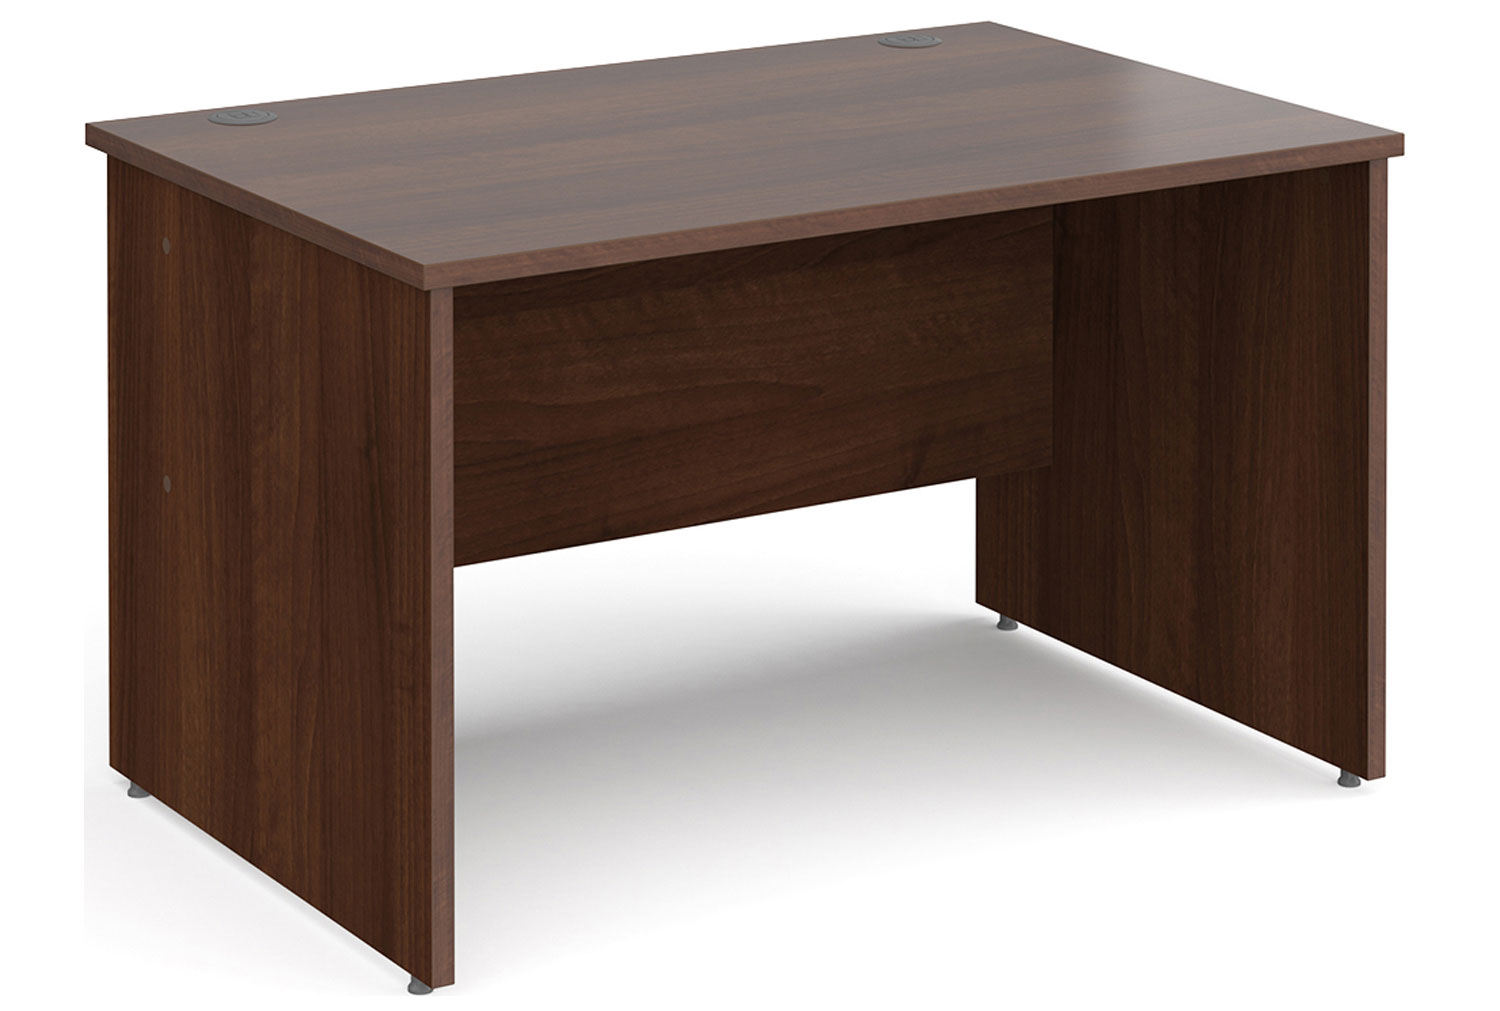 Tully Panel End Rectangular Office Desk, 120wx80dx73h (cm), Walnut, Express Delivery